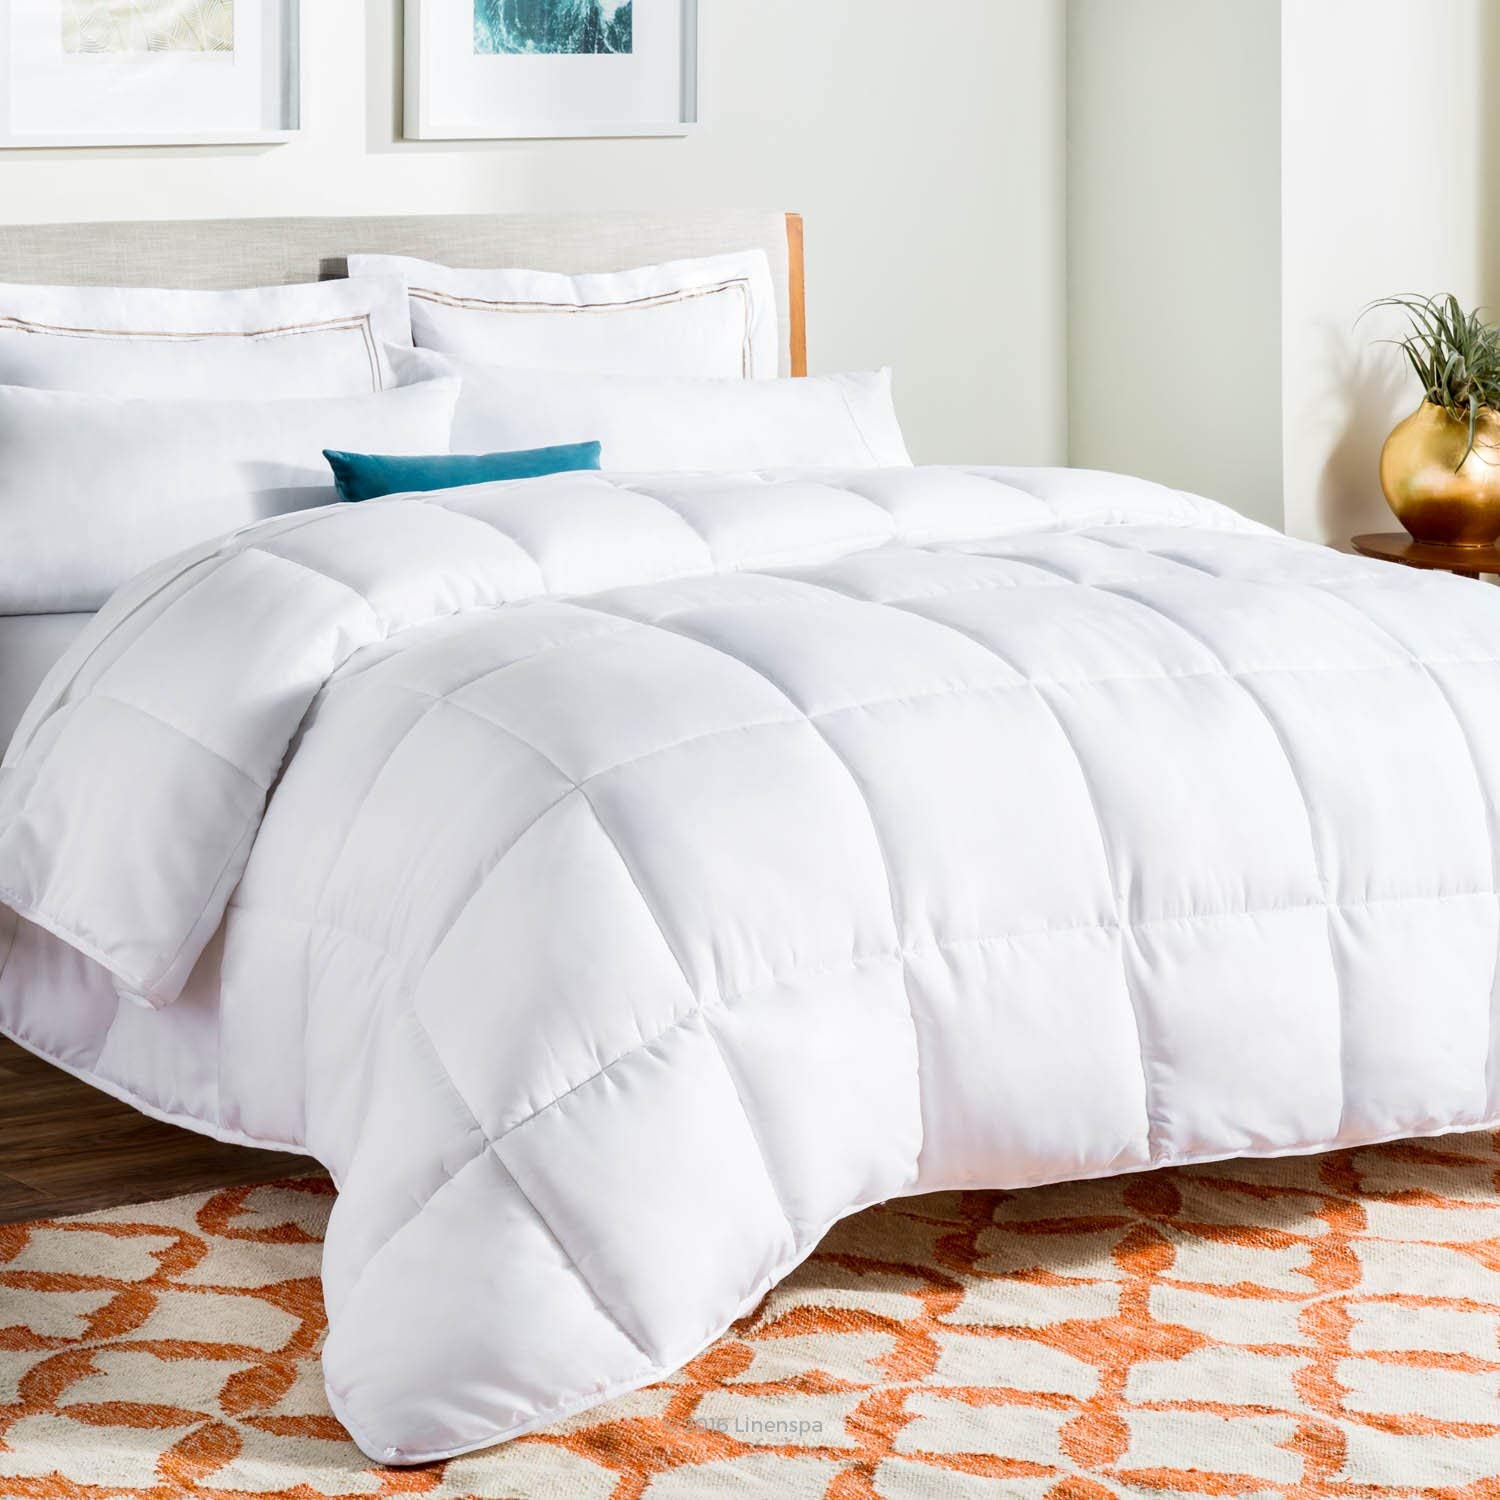 Linenspa All-Season Quilted Queen Comforter